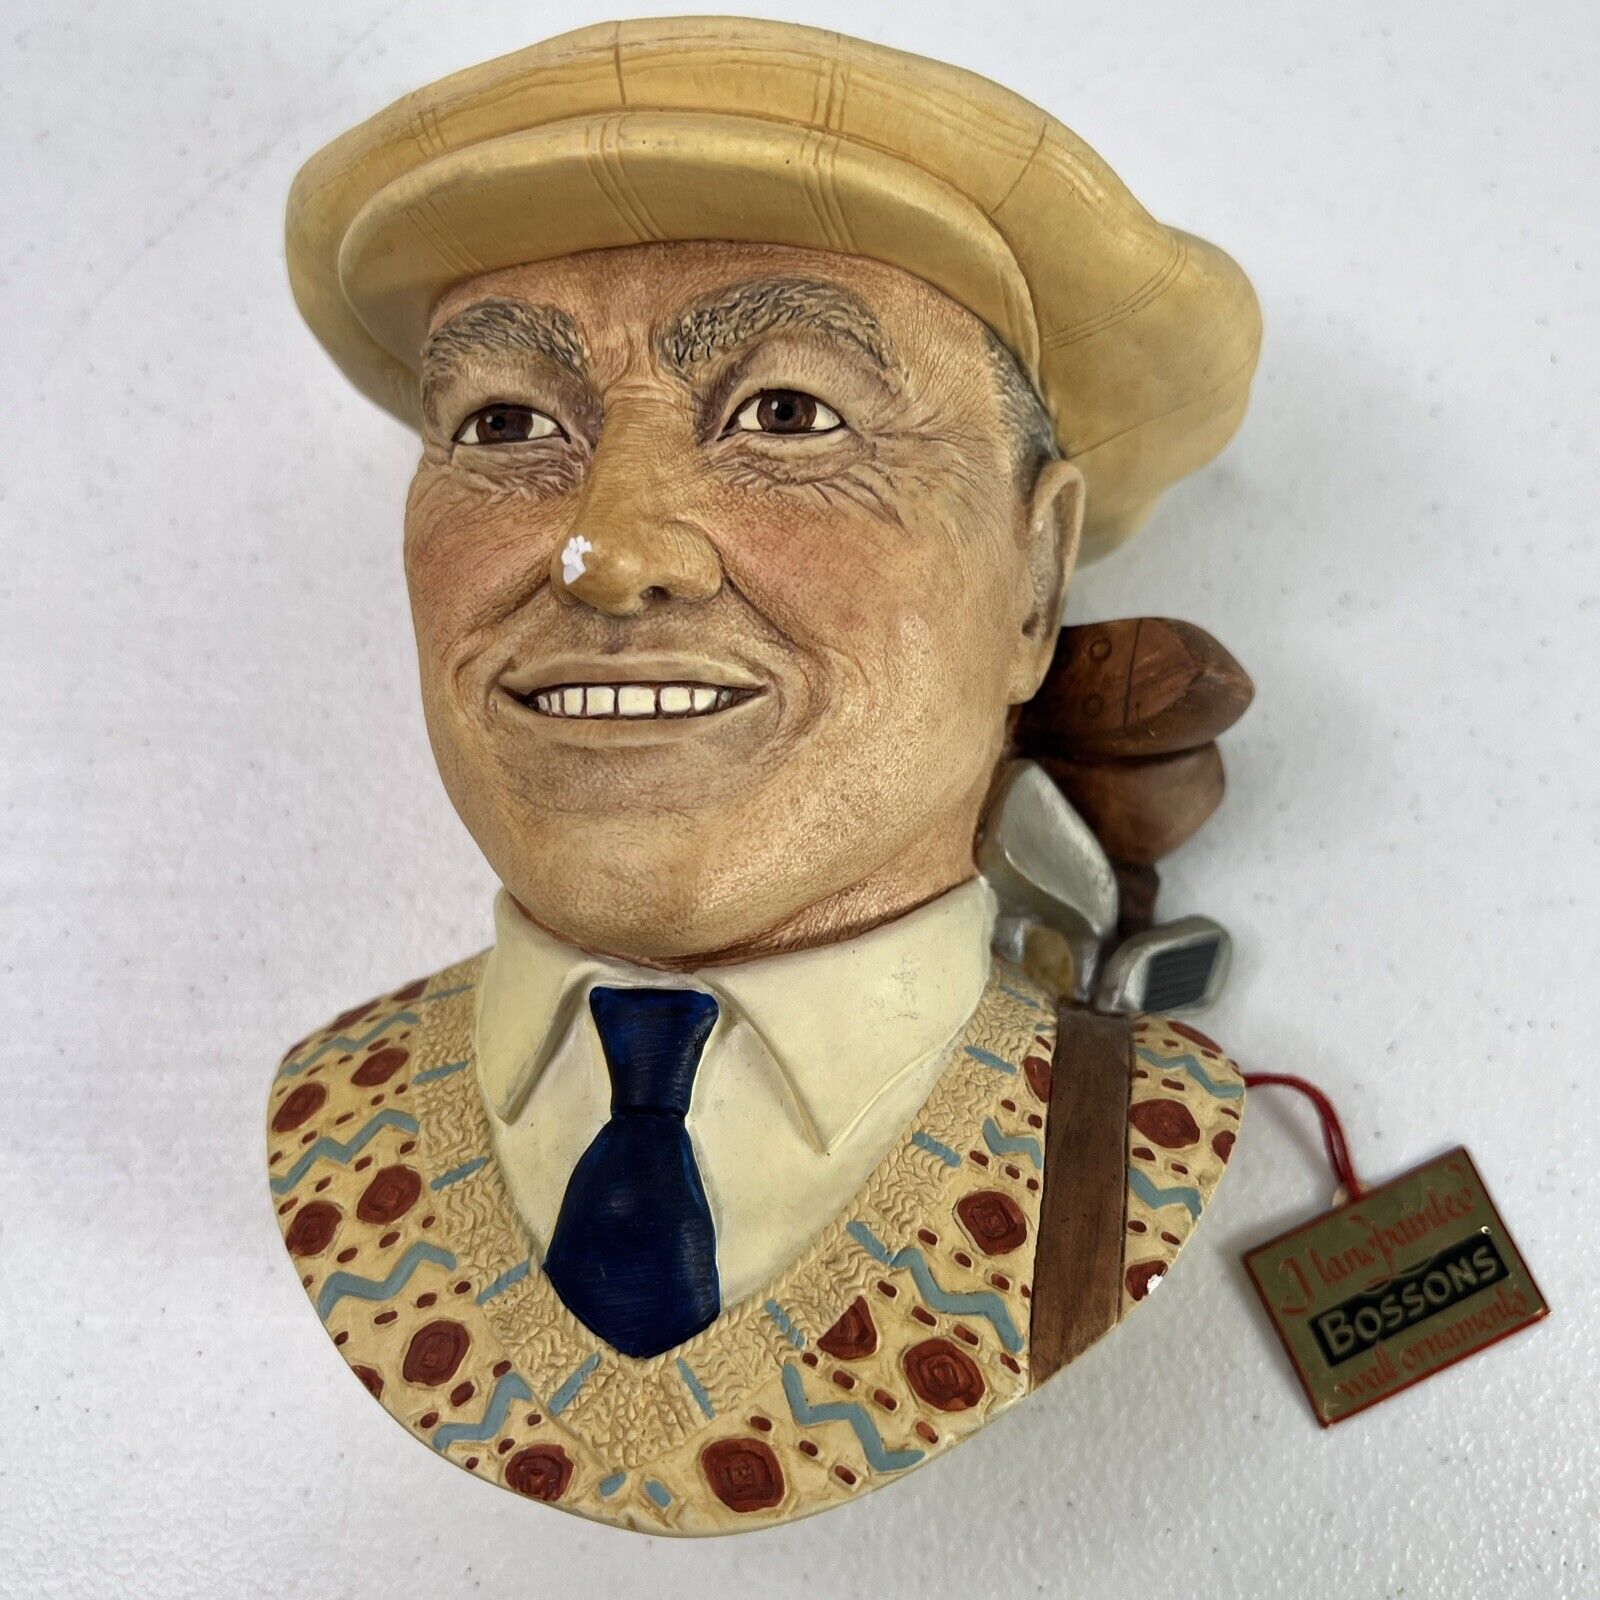 Bossons 1995 Golfer Chalkware Head w/ Original Tag Chip on the Nose